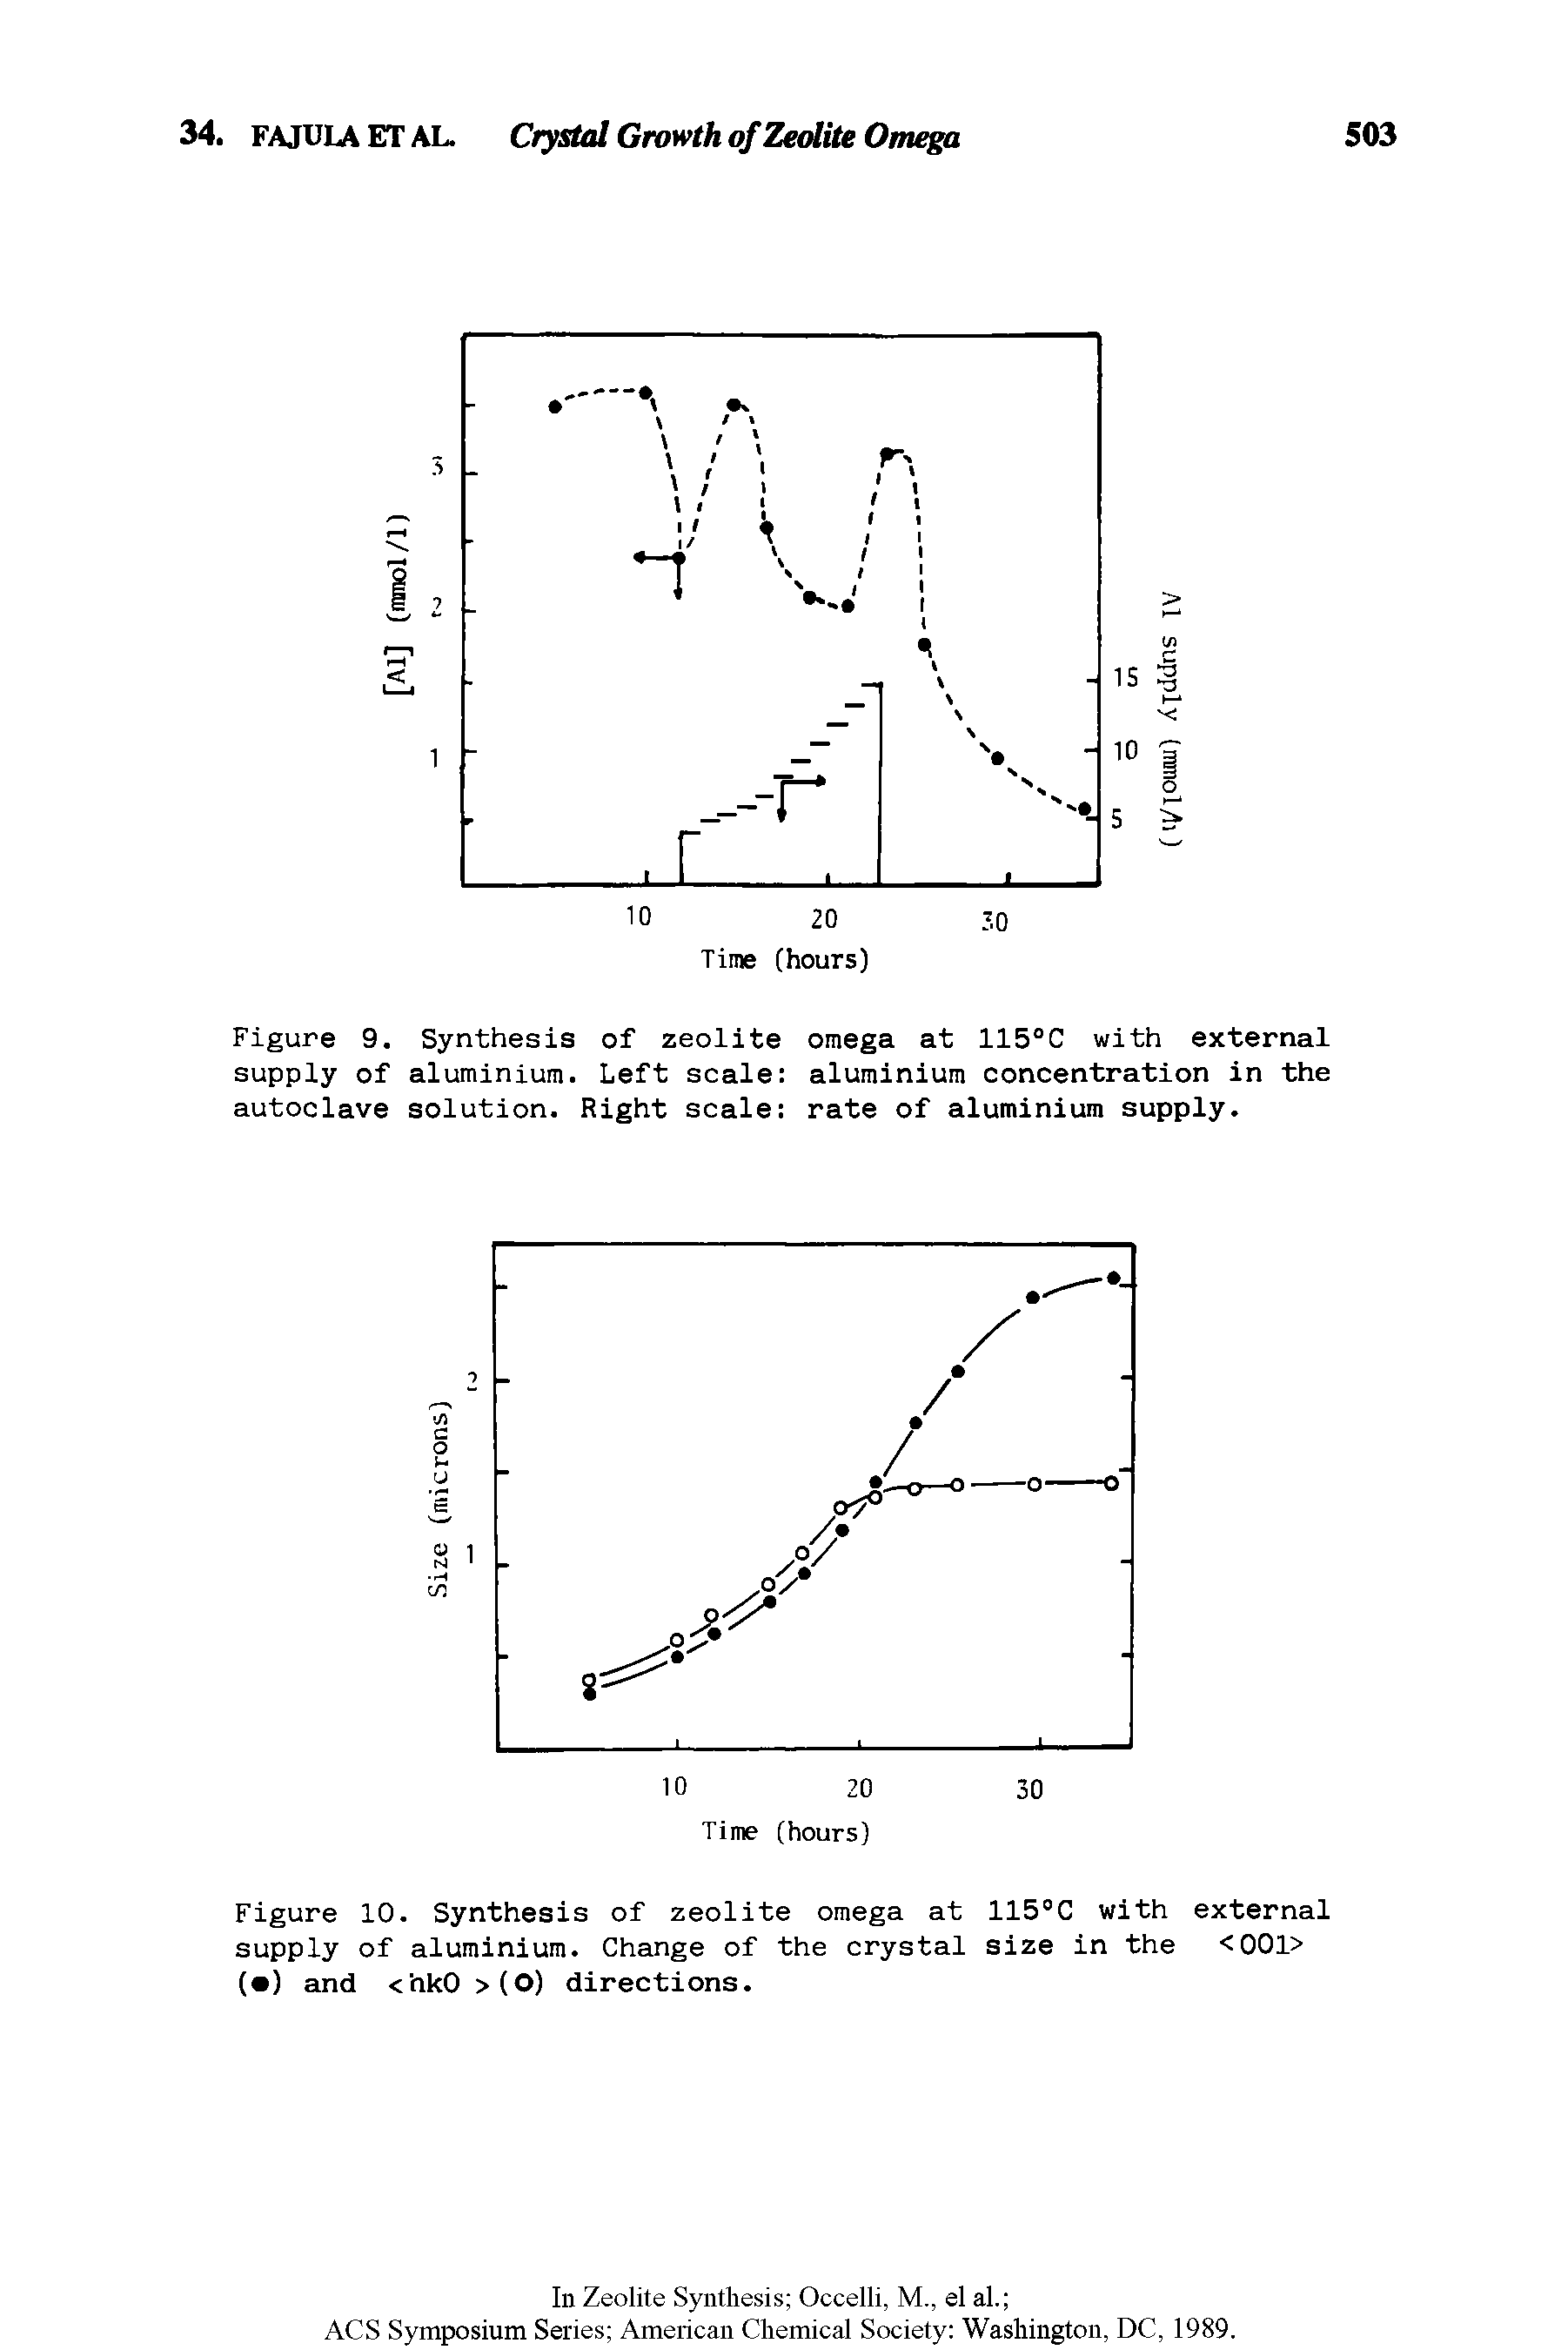 Figure 10. Synthesis of zeolite omega at 115°C with external supply of aluminium. Change of the crystal size in the <001> ( ) and <hk0 >(0) directions.